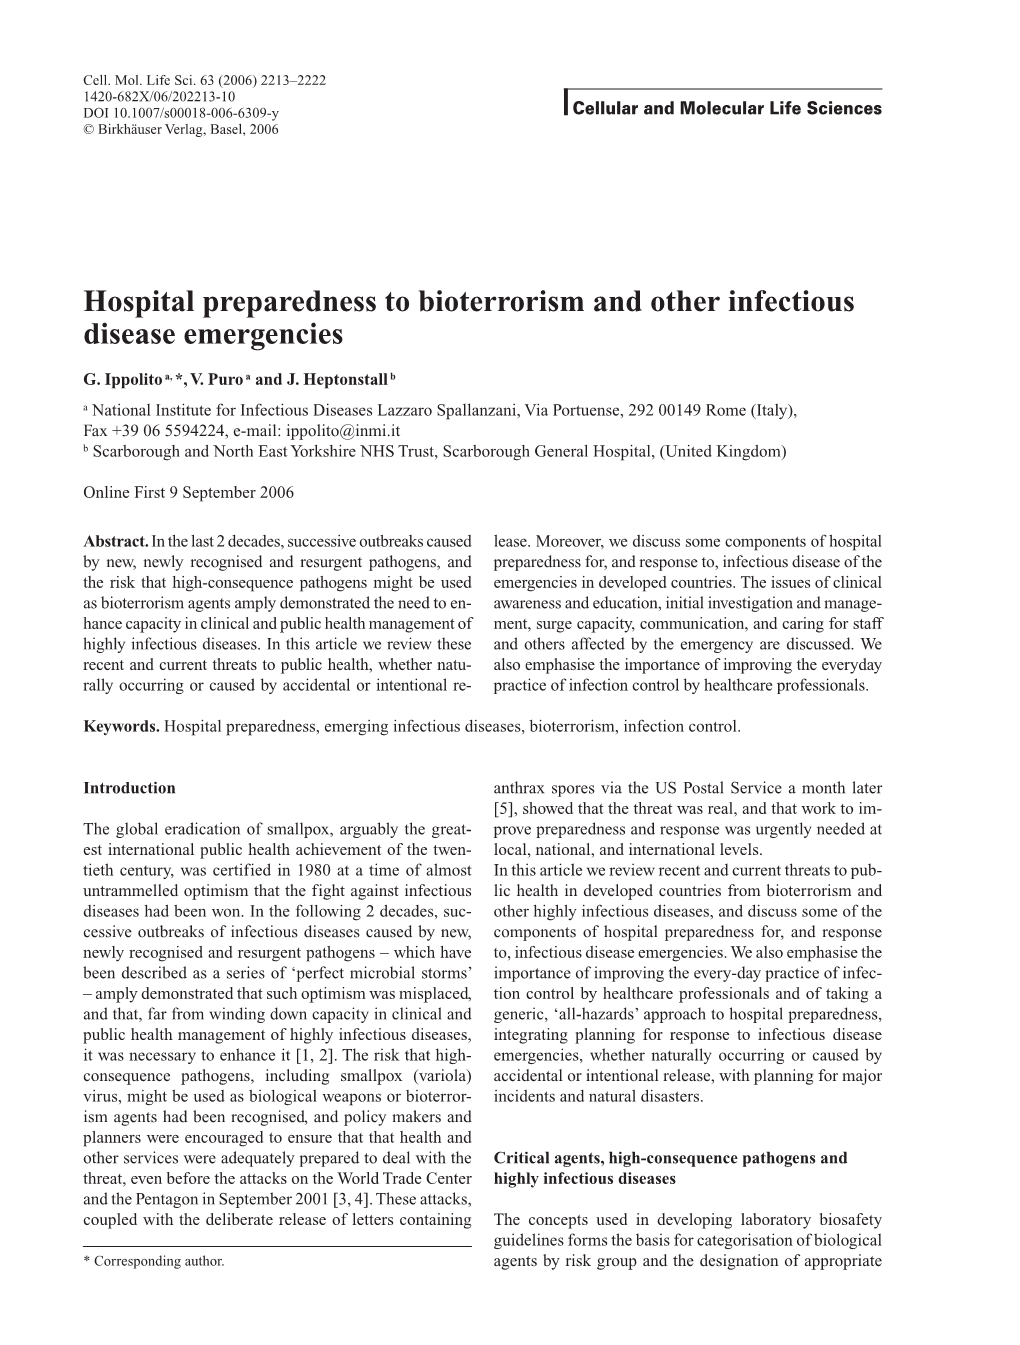 Hospital Preparedness to Bioterrorism and Other Infectious Disease Emergencies